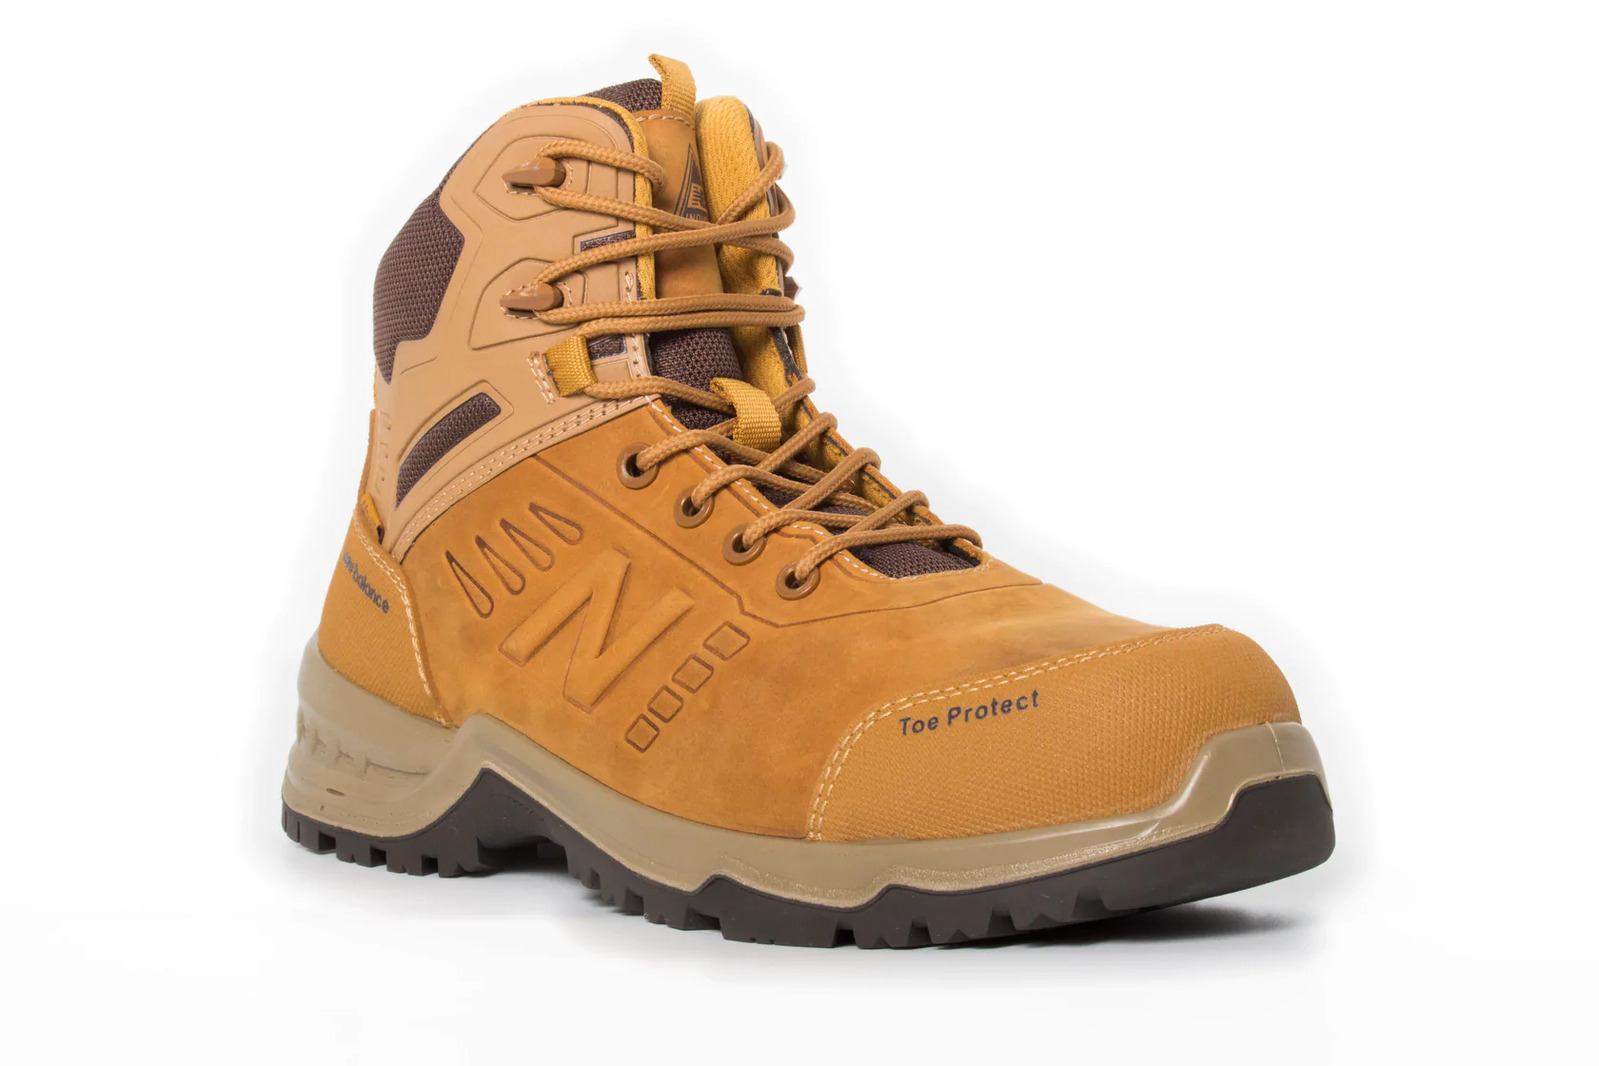 New,Balance Men's Contour Steel Toe Cap Safety Work Boots with Zip - Wheat